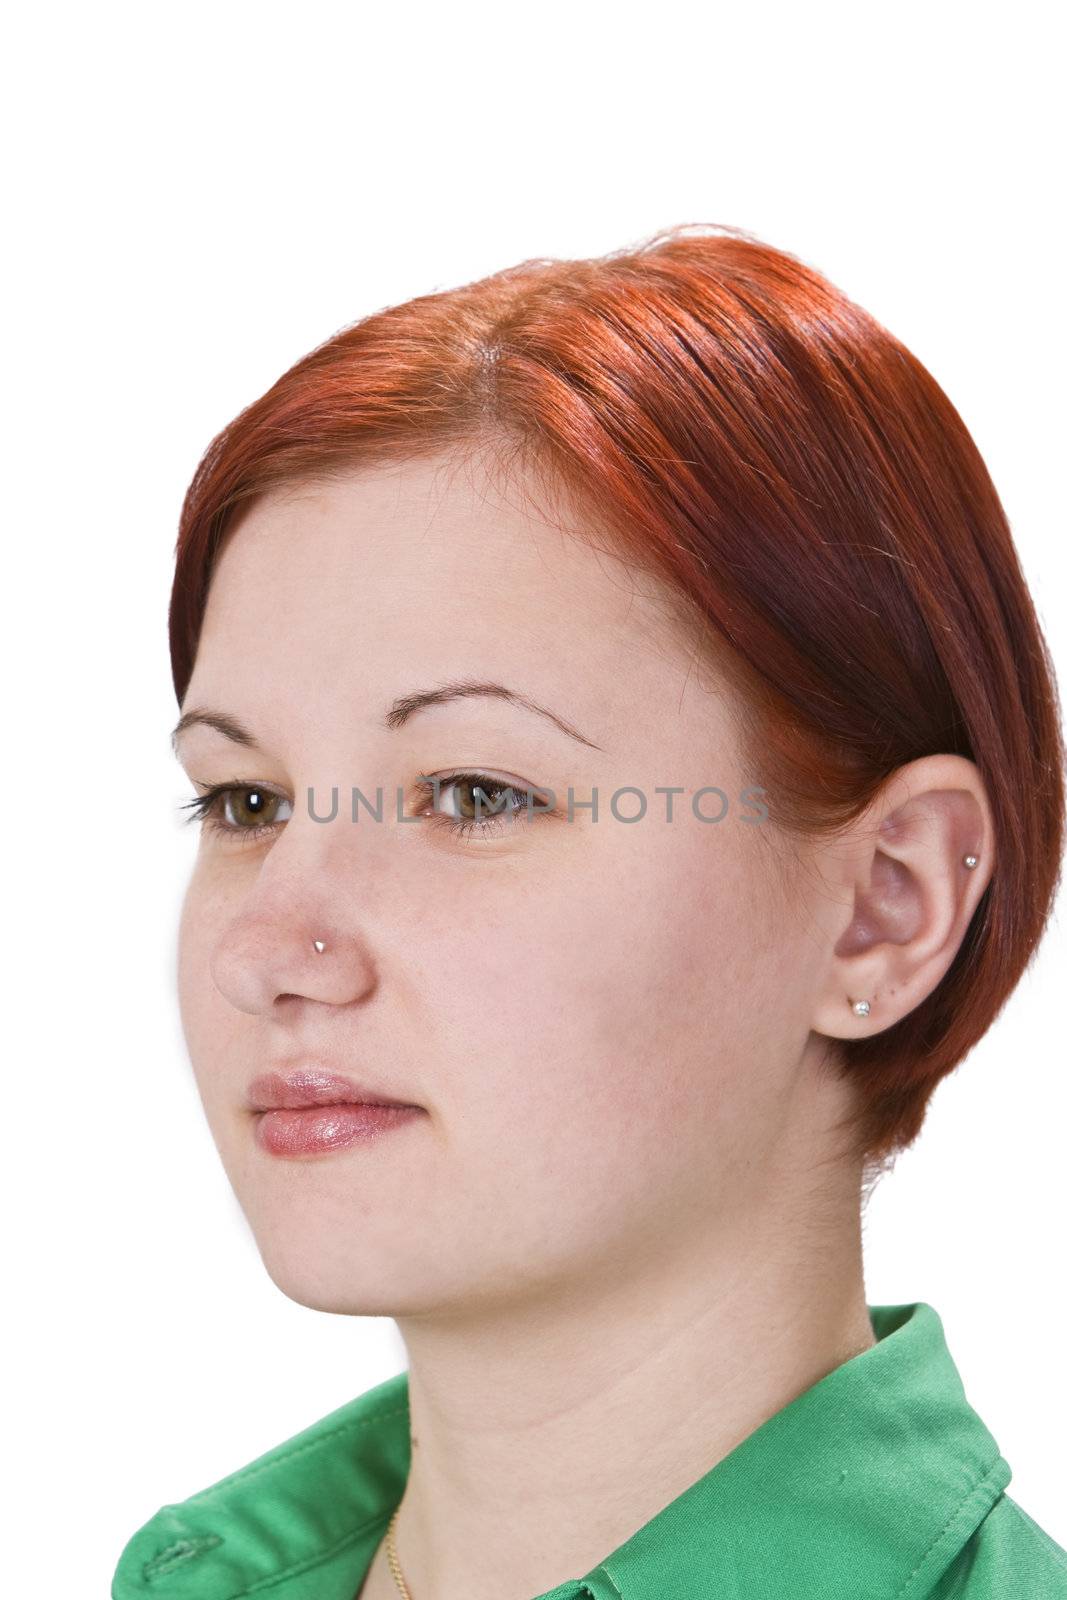 Portrait of a redheaded girl with pierced nose and ear isolated against a white background.